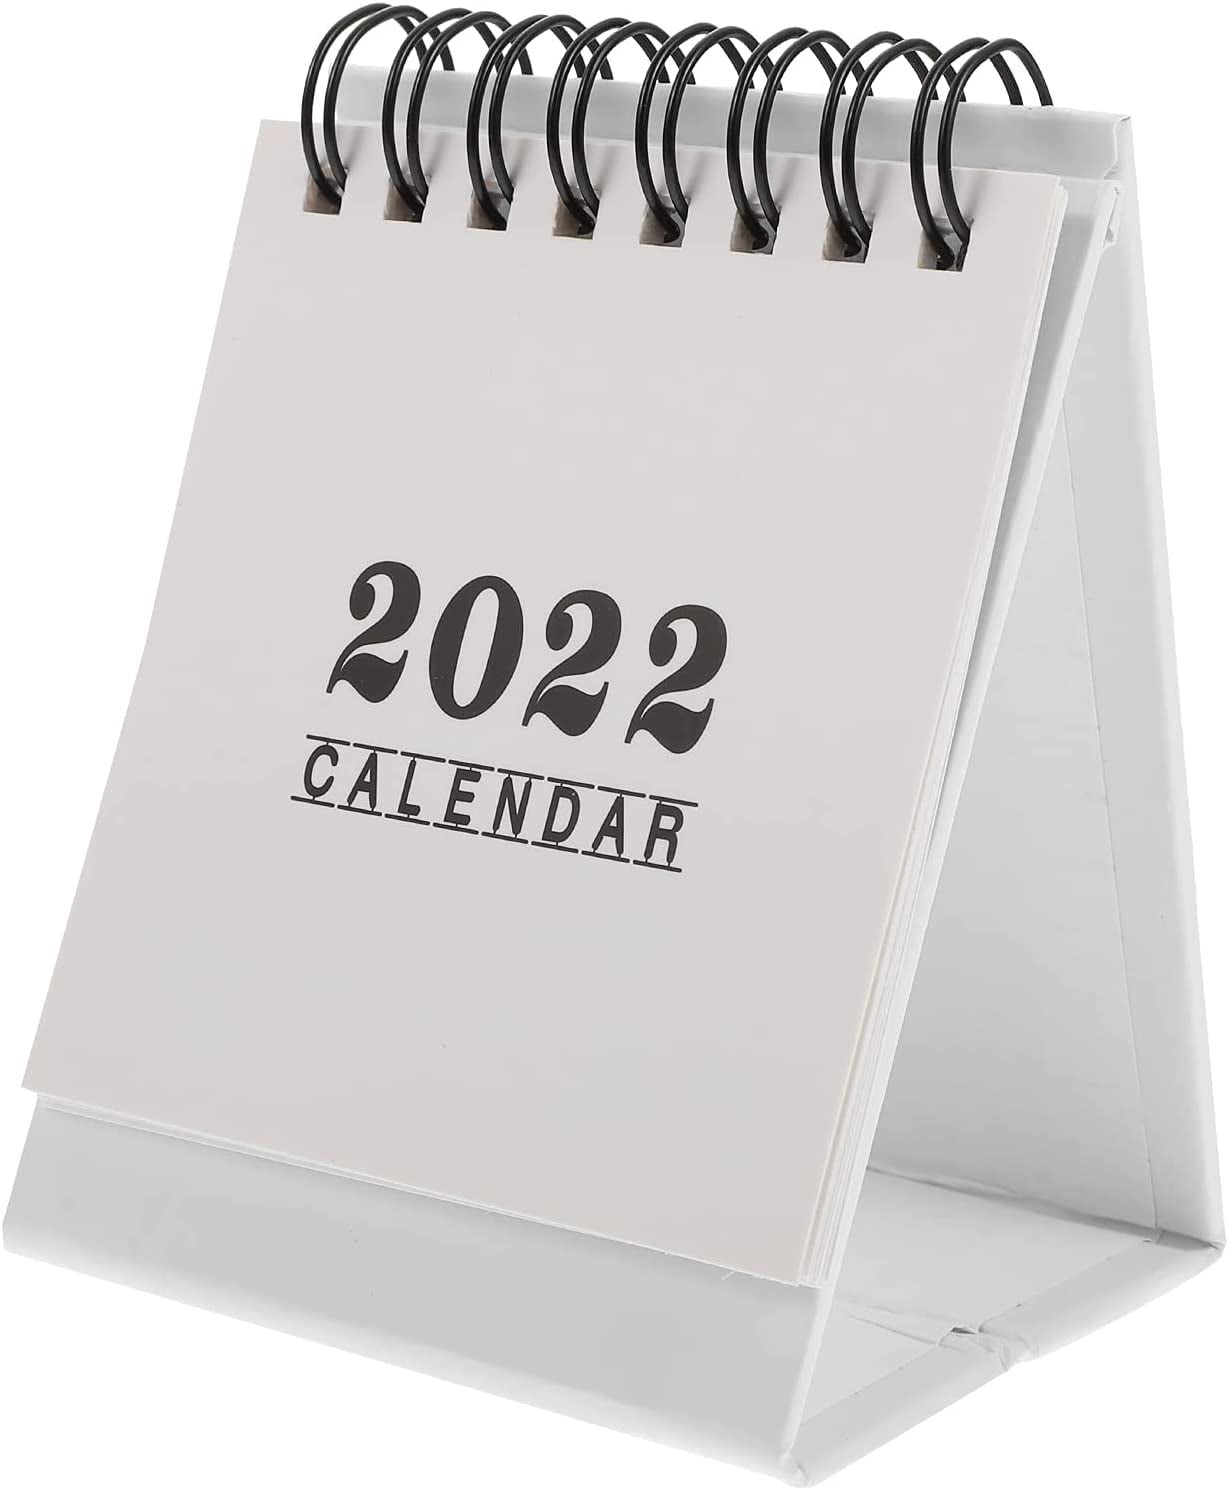 Foldable Desktop Calendar Year Calender Yearly Planner Decoration Ultra-Thin 